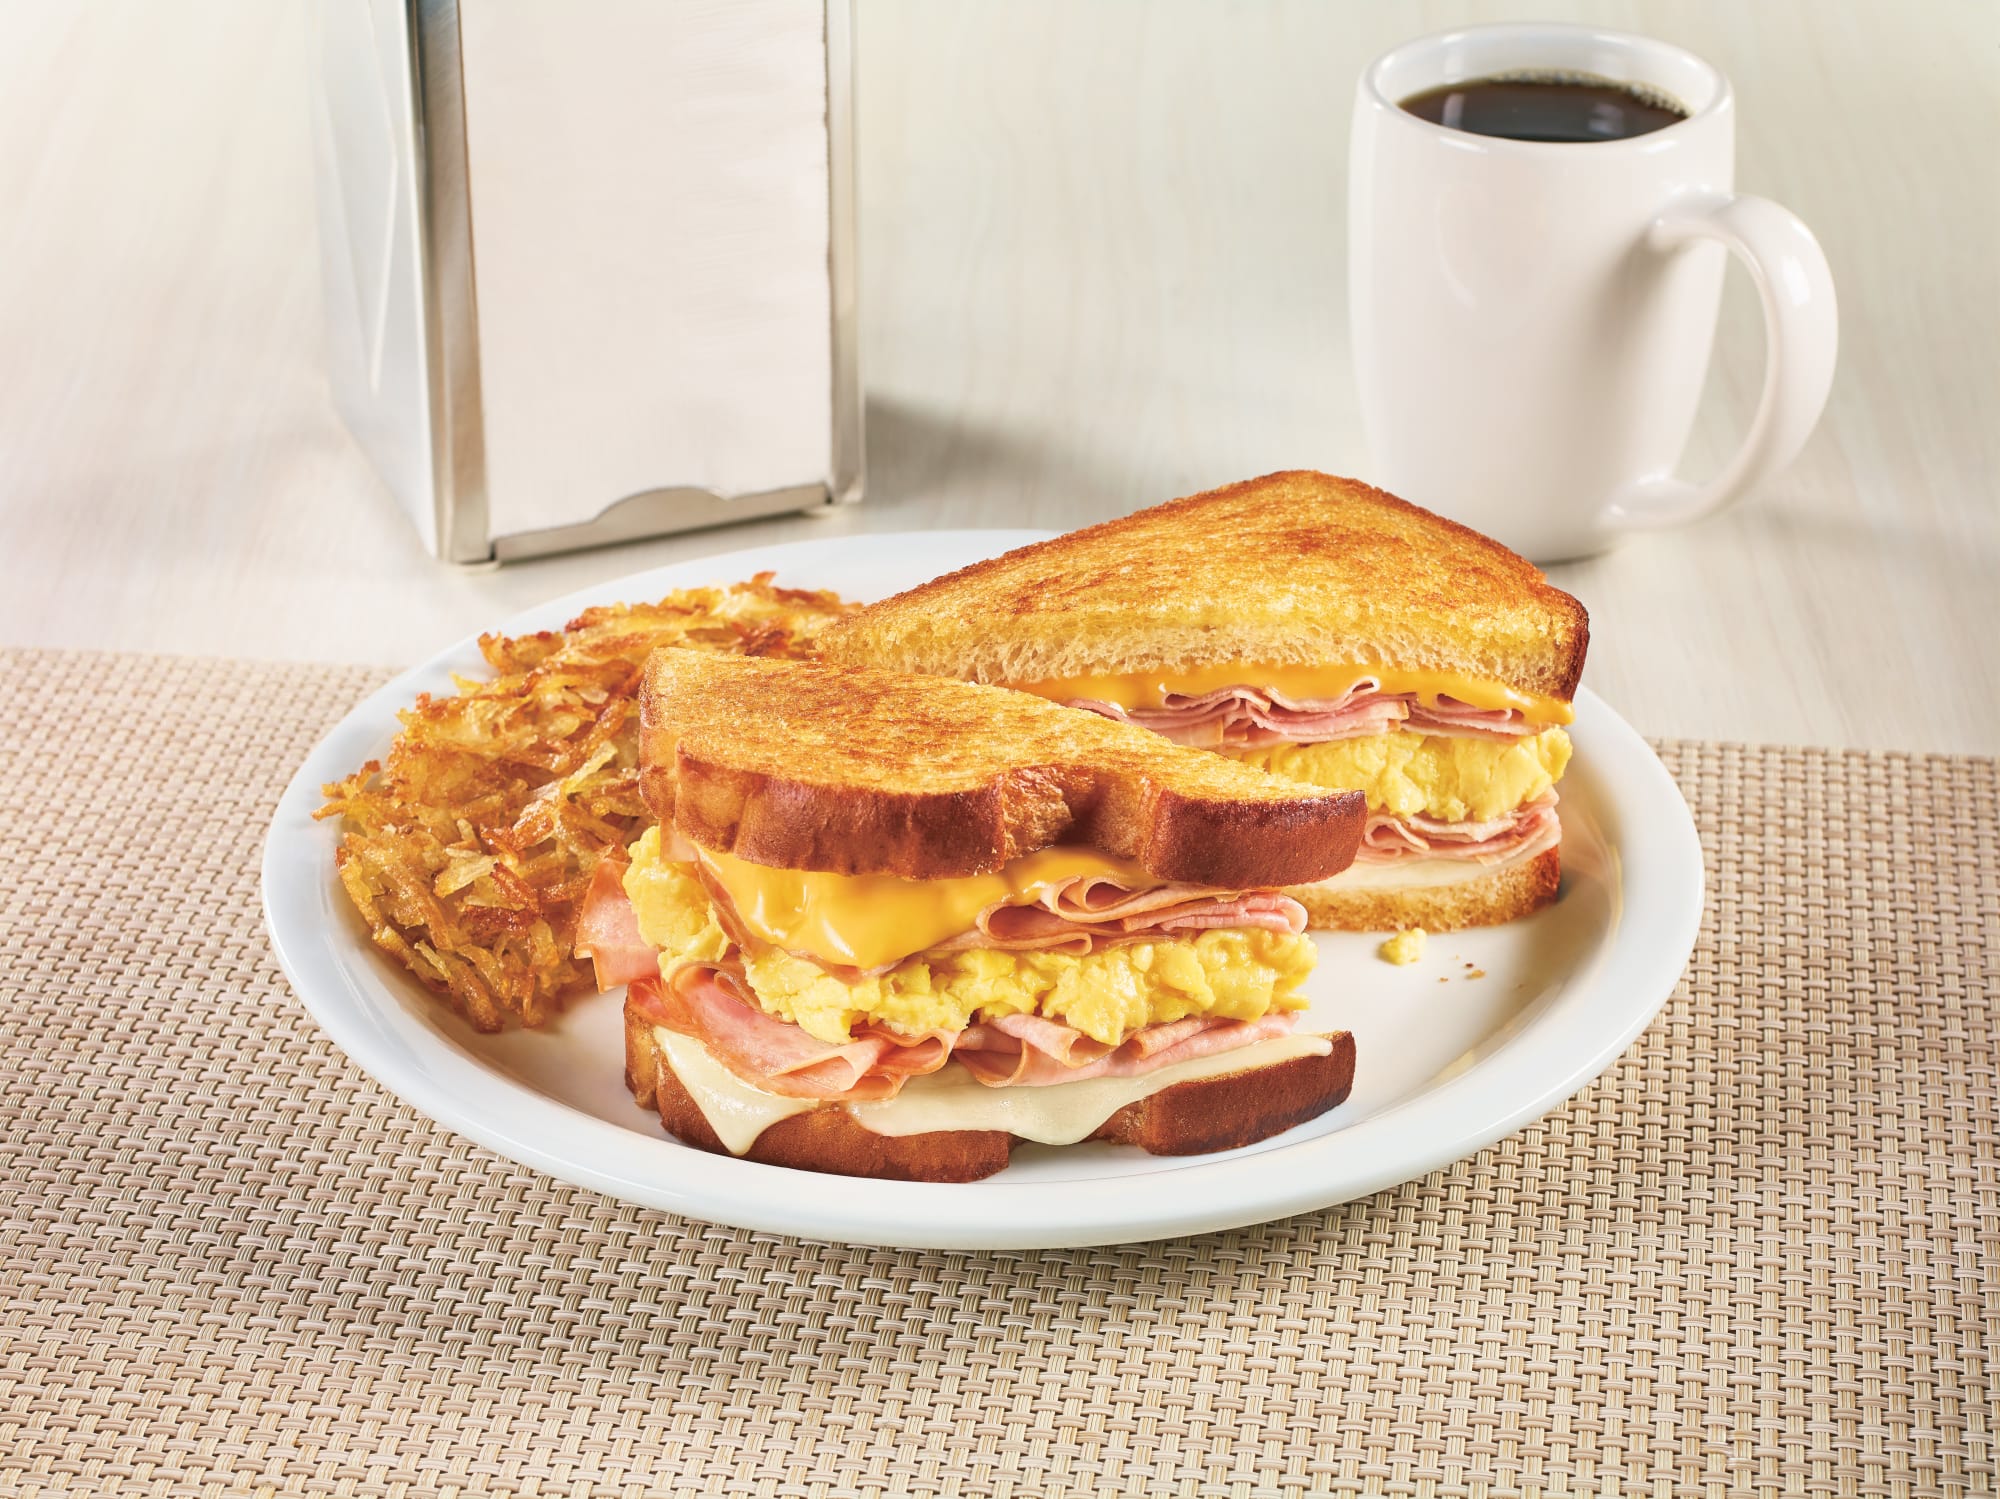 Denny's adds some new Melts and Bowls to their menu